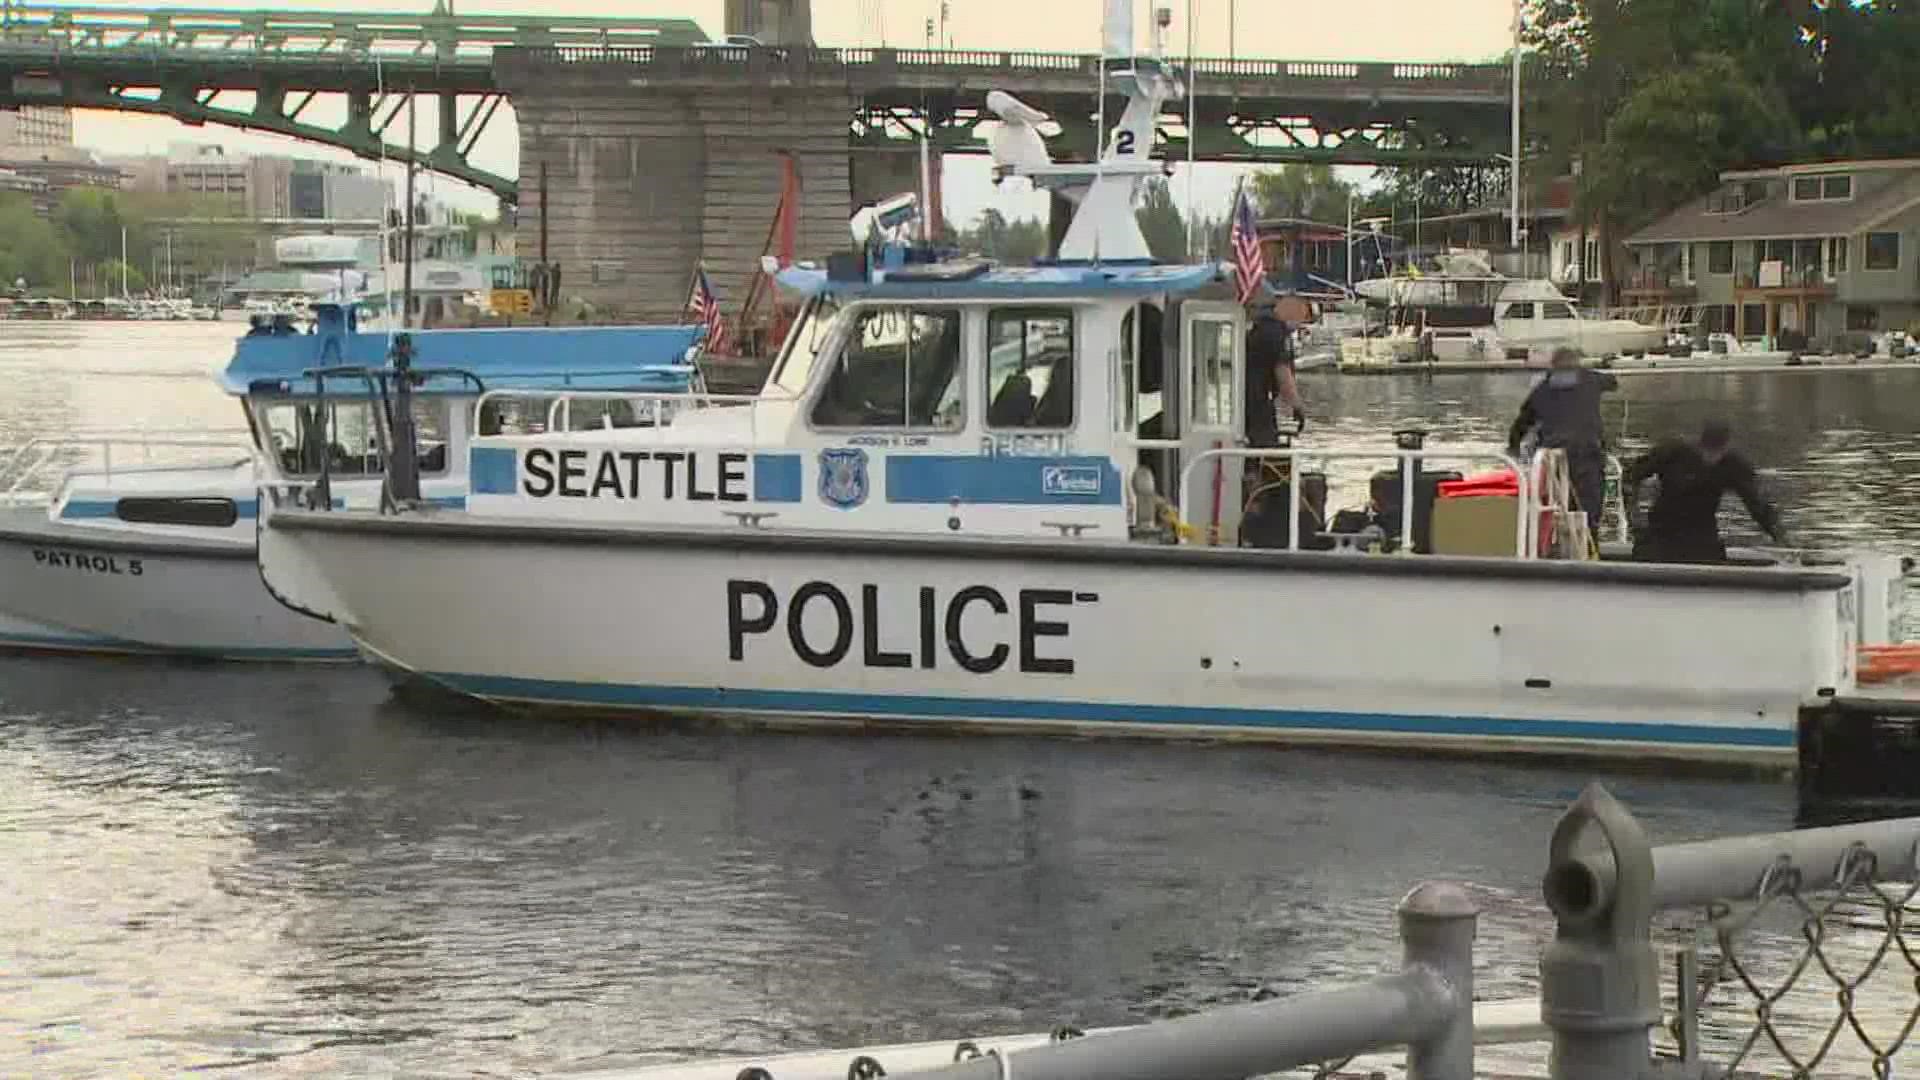 Seattle police said a dive team located the missing driver's body in the water, four hours after the two-car rollover accident.